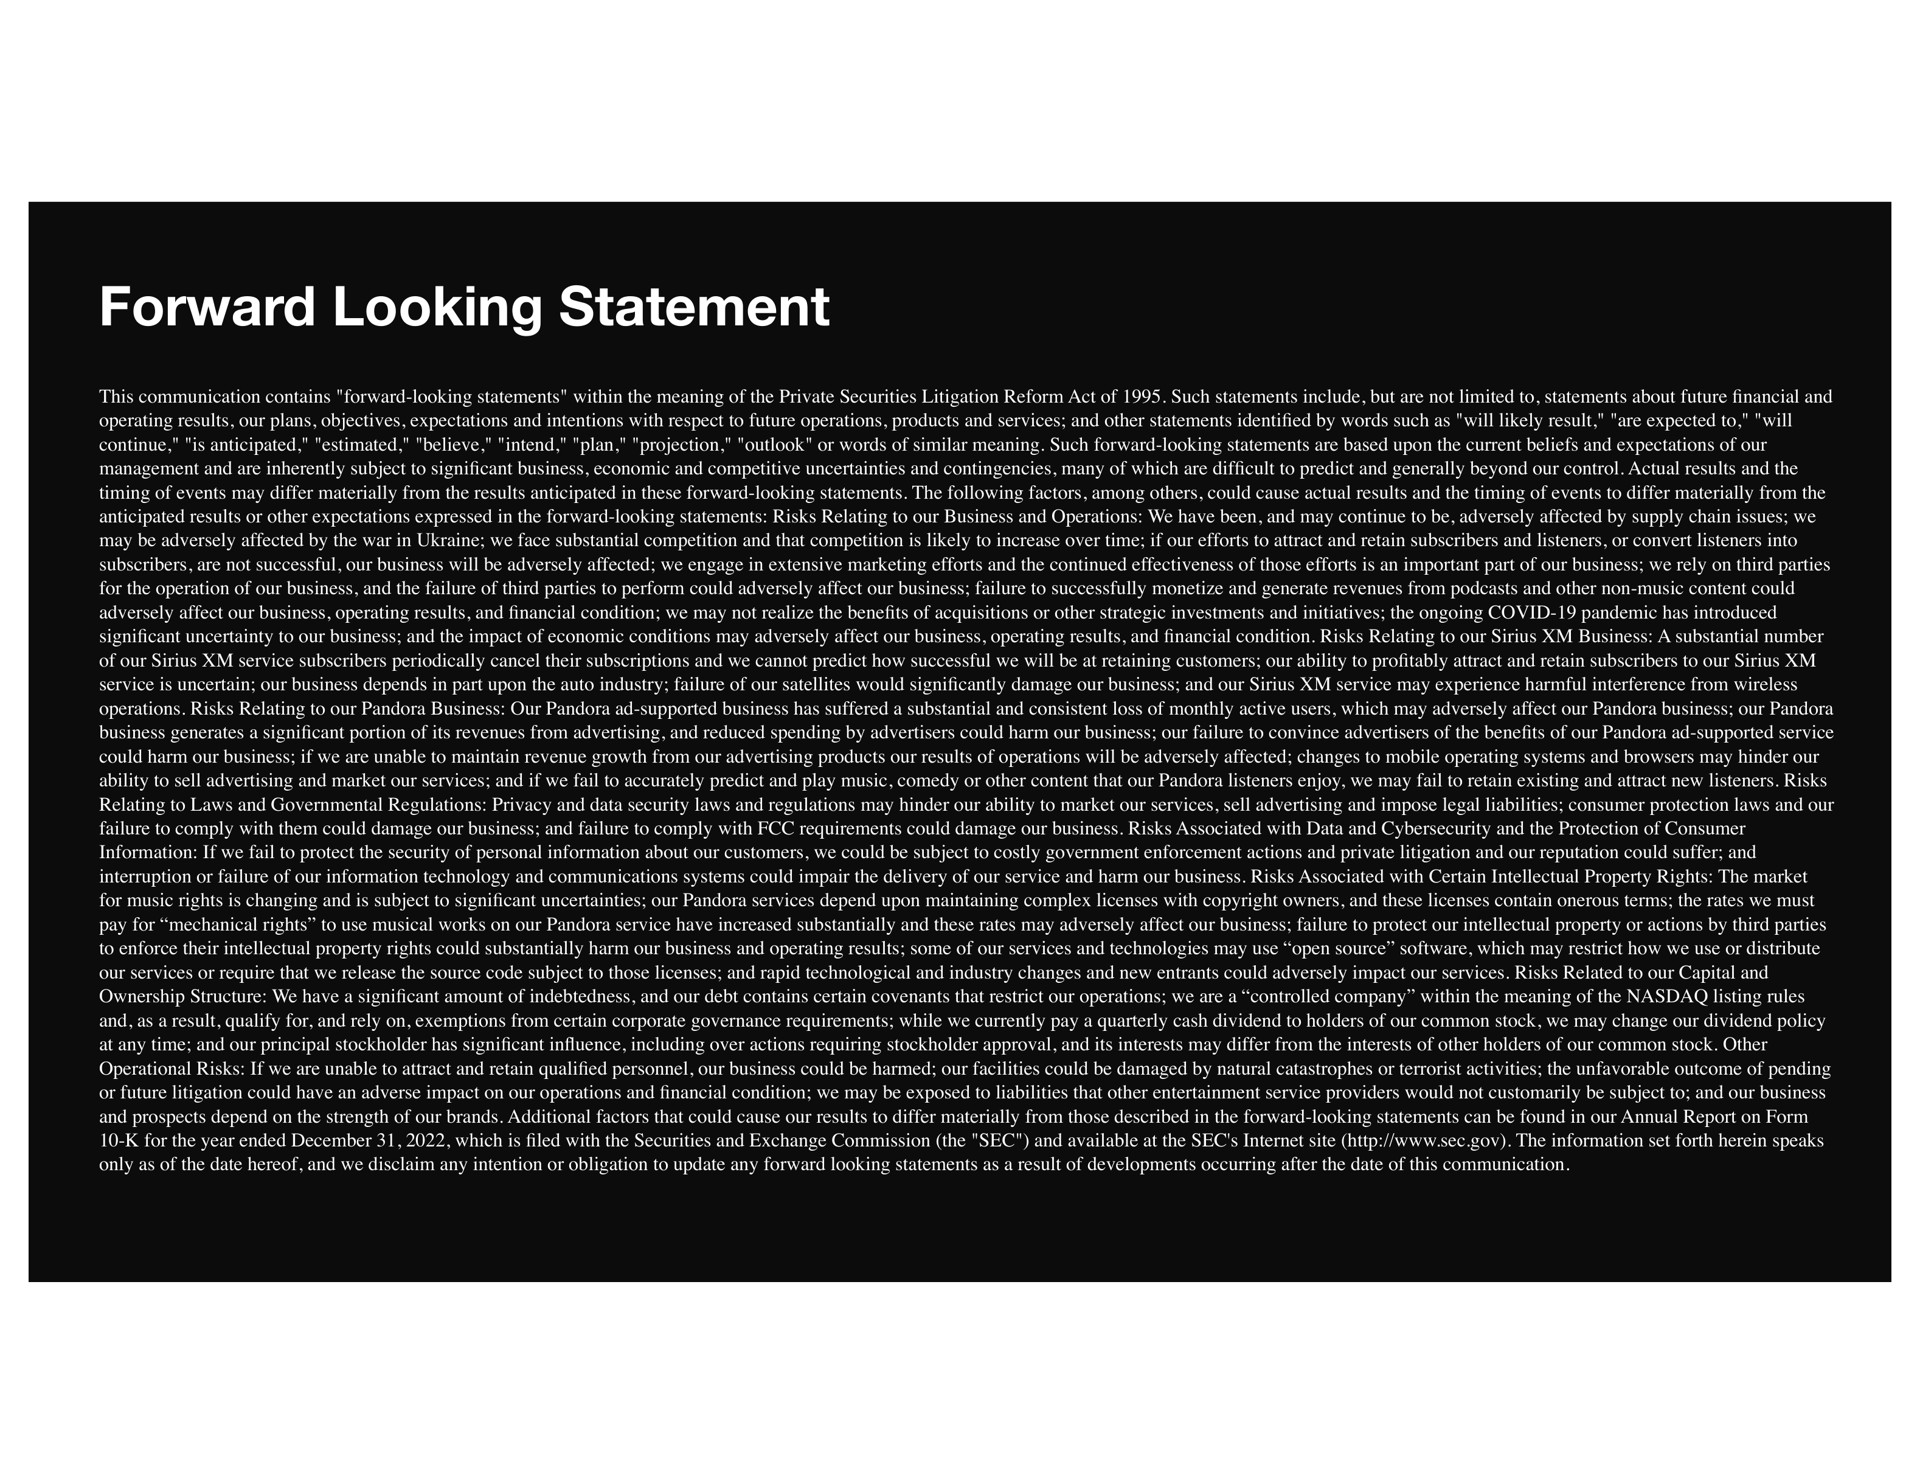 forward looking statement this communication contains forward looking statements within the meaning of the private securities litigation reform act of such statements include but are not limited to statements about future and operating results our plans objectives expectations and intentions with respect to future operations products and services and other statements by words such as will likely result are expected to will continue is anticipated estimated believe intend plan projection outlook or words of similar meaning such forward looking statements are based upon the current beliefs and expectations of our management and are inherently subject to cant business economic and competitive uncertainties and contingencies many of which are cult to predict and generally beyond our control actual results and the timing of events may differ materially from the results anticipated in these forward looking statements the following factors among could cause actual results and the timing of events to differ materially from the anticipated results or other expectations expressed in the forward looking statements risks relating to our business and operations we have been and may continue to be adversely affected by supply chain issues we may be adversely affected by the war in we face substantial competition and that competition is likely to increase over time if our efforts to attract and retain subscribers and listeners or convert listeners into subscribers are not successful our business will be adversely affected we engage in extensive marketing efforts and the continued effectiveness of those efforts is an important part of our business we rely on third parties for the operation of our business and the failure of third parties to perform could adversely affect our business failure to successfully monetize and generate revenues from and other non music content could adversely affect our business operating results and condition we may not realize the bene of acquisitions or other strategic investments and initiatives the ongoing covid pandemic has introduced cant uncertainty to our business and the impact of economic conditions may adversely affect our business operating results and condition risks relating to our business a substantial number of our service subscribers periodically cancel their subscriptions and we cannot predict how successful we will be at retaining customers our ability to pro attract and retain subscribers to our service is uncertain our business depends in part upon the auto industry failure of our satellites would damage our business and our service may experience harmful interference from wireless operations risks relating to our pandora business our pandora supported business has suffered a substantial and consistent loss of monthly active users which may adversely affect our pandora business our pandora business generates a cant portion of its revenues from advertising and reduced spending by advertisers could harm our business our failure to convince advertisers of the bene of our pandora supported service could harm our business if we are unable to maintain revenue growth from our advertising products our results of operations will be adversely affected changes to mobile operating systems and browsers may hinder our ability to sell advertising and market our services and if we fail to accurately predict and play music comedy or other content that our pandora listeners enjoy we may fail to retain existing and attract new listeners risks relating to laws and governmental regulations privacy and data security laws and regulations may hinder our ability to market our services sell advertising and impose legal liabilities consumer protection laws and our failure to comply with them could damage our business and failure to comply with requirements could damage our business risks associated with data and and the protection of consumer information if we fail to protect the security of personal information about our customers we could be subject to costly government enforcement actions and private litigation and our reputation could suffer and interruption or failure of our information technology and communications systems could impair the delivery of our service and harm our business risks associated with certain intellectual property rights the market for music rights is changing and is subject to cant uncertainties our pandora services depend upon maintaining complex licenses with copyright owners and these licenses contain onerous terms the rates we must pay for mechanical rights to use musical works on our pandora service have increased substantially and these rates may adversely affect our business failure to protect our intellectual property or actions by third parties to enforce their intellectual property rights could substantially harm our business and operating results some of our services and technologies may use open source which may restrict how we use or distribute our services or require that we release the source code subject to those licenses and rapid technological and industry changes and new entrants could adversely impact our services risks related to our capital and ownership structure we have a cant amount of indebtedness and our debt contains certain covenants that restrict our operations we are a controlled company within the meaning of the listing rules and as a result qualify for and rely on exemptions from certain corporate governance requirements while we currently pay a quarterly cash dividend to holders of our common stock we may change our dividend policy at any time and our principal stockholder has cant in including over actions requiring stockholder approval and its interests may differ from the interests of other holders of our common stock other operational risks if we are unable to attract and retain personnel our business could be harmed our facilities could be damaged by natural catastrophes or terrorist activities the unfavorable outcome of pending or future litigation could have an adverse impact on our operations and condition we may be exposed to liabilities that other entertainment service providers would not customarily be subject to and our business and prospects depend on the strength of our brands additional factors that could cause our results to differ materially from those described in the forward looking statements can be found in our annual report on form for the year ended which is led with the securities and exchange commission the sec and available at the sec site the information set forth herein speaks only as of the date hereof and we disclaim any intention or obligation to update any forward looking statements as a result of developments occurring after the date of this communication | SiriusXM